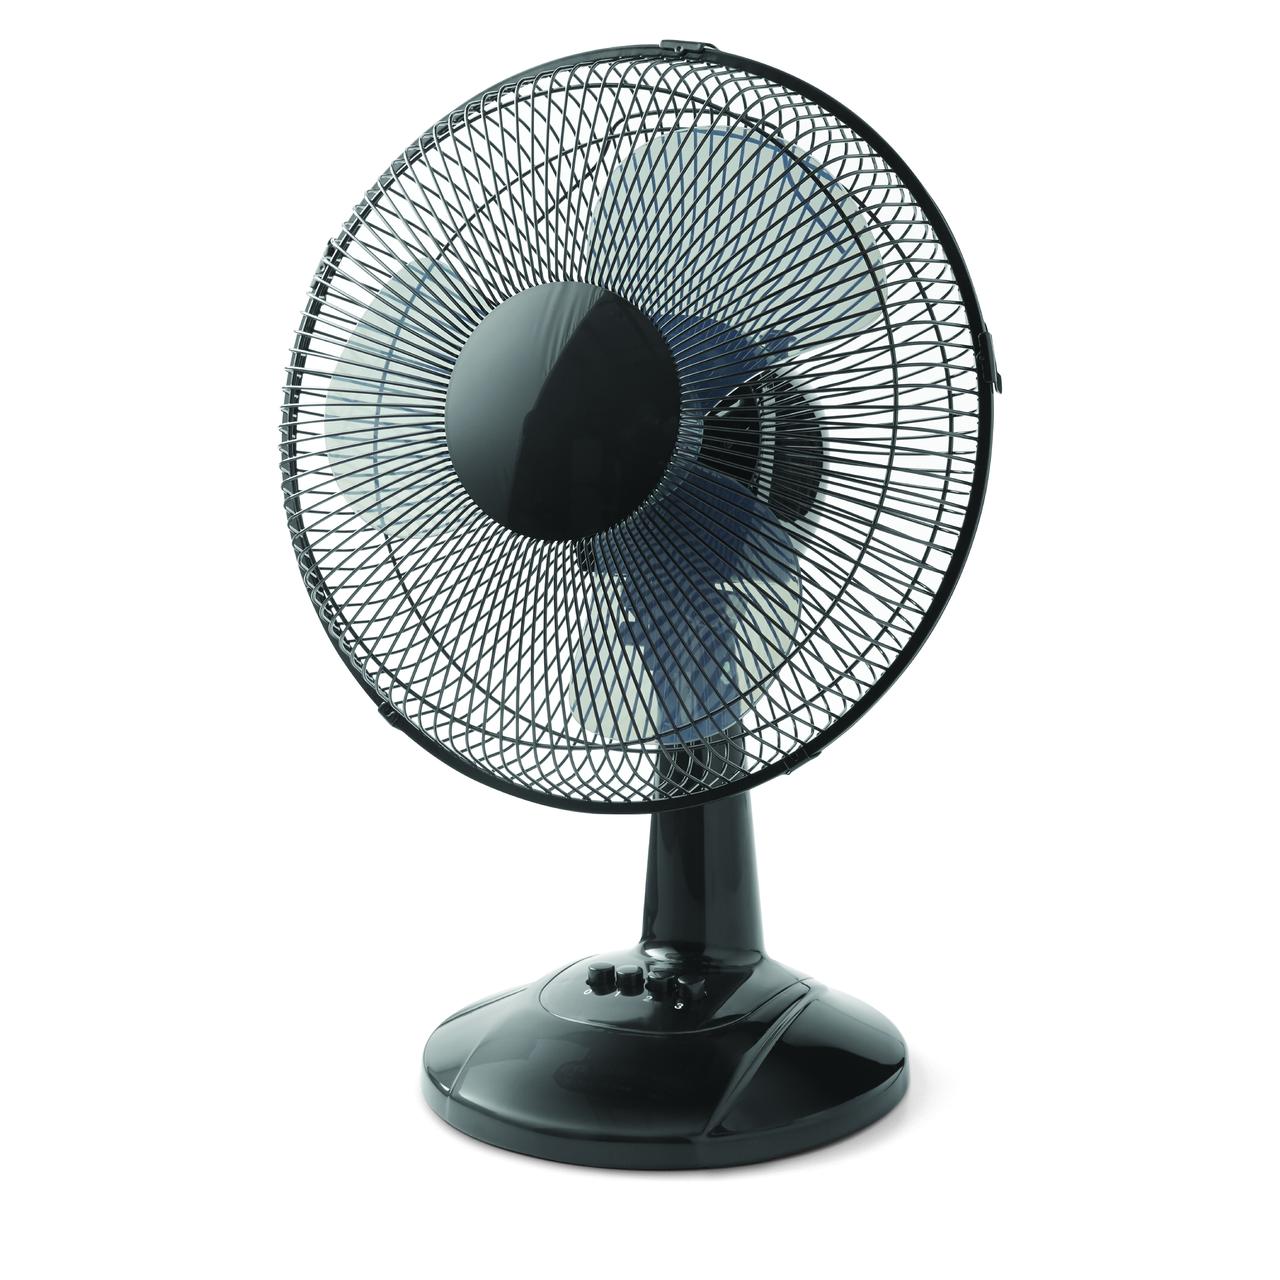 Mainstays 12" 3-Speed Oscillating Table Fan, FT30-8MBB, New, Black - image 1 of 9